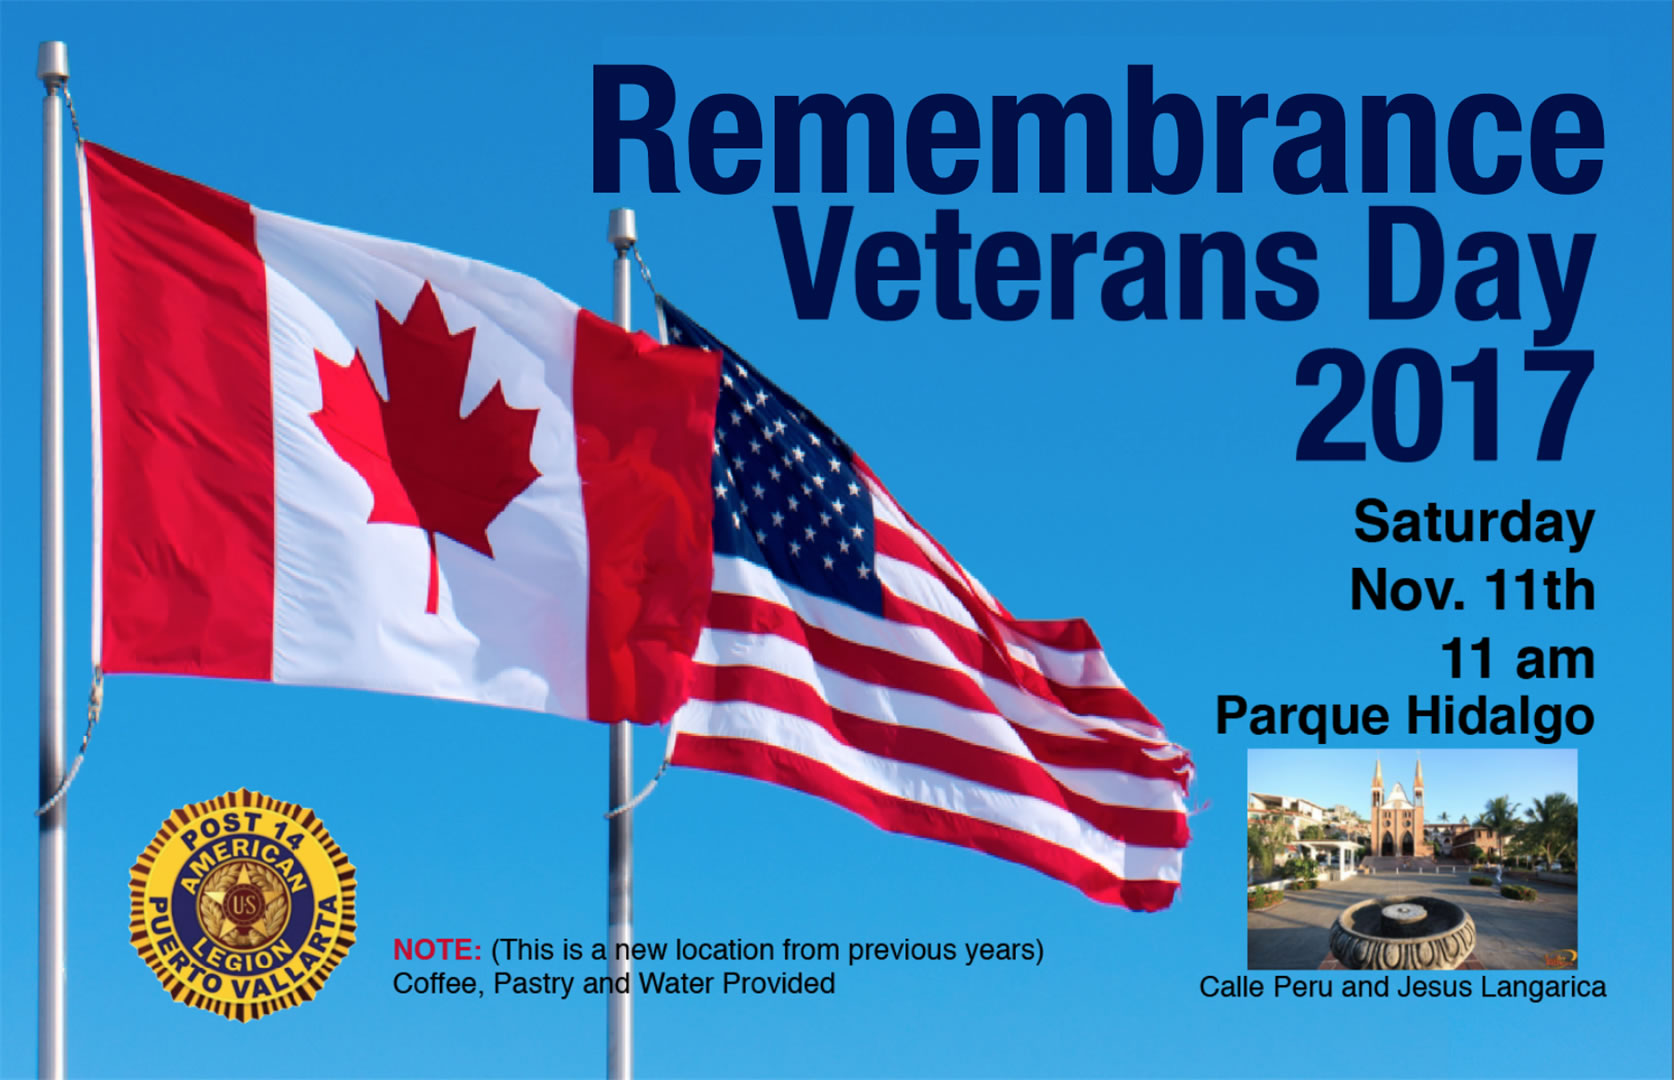 This Saturday, November 11th Remembrance Day &amp; Veterans Day Ceremony at Parque Hidalgo. Location change this year. At the north end of the Malecon. Stop by if you can. Coffee, pastries and water provided.